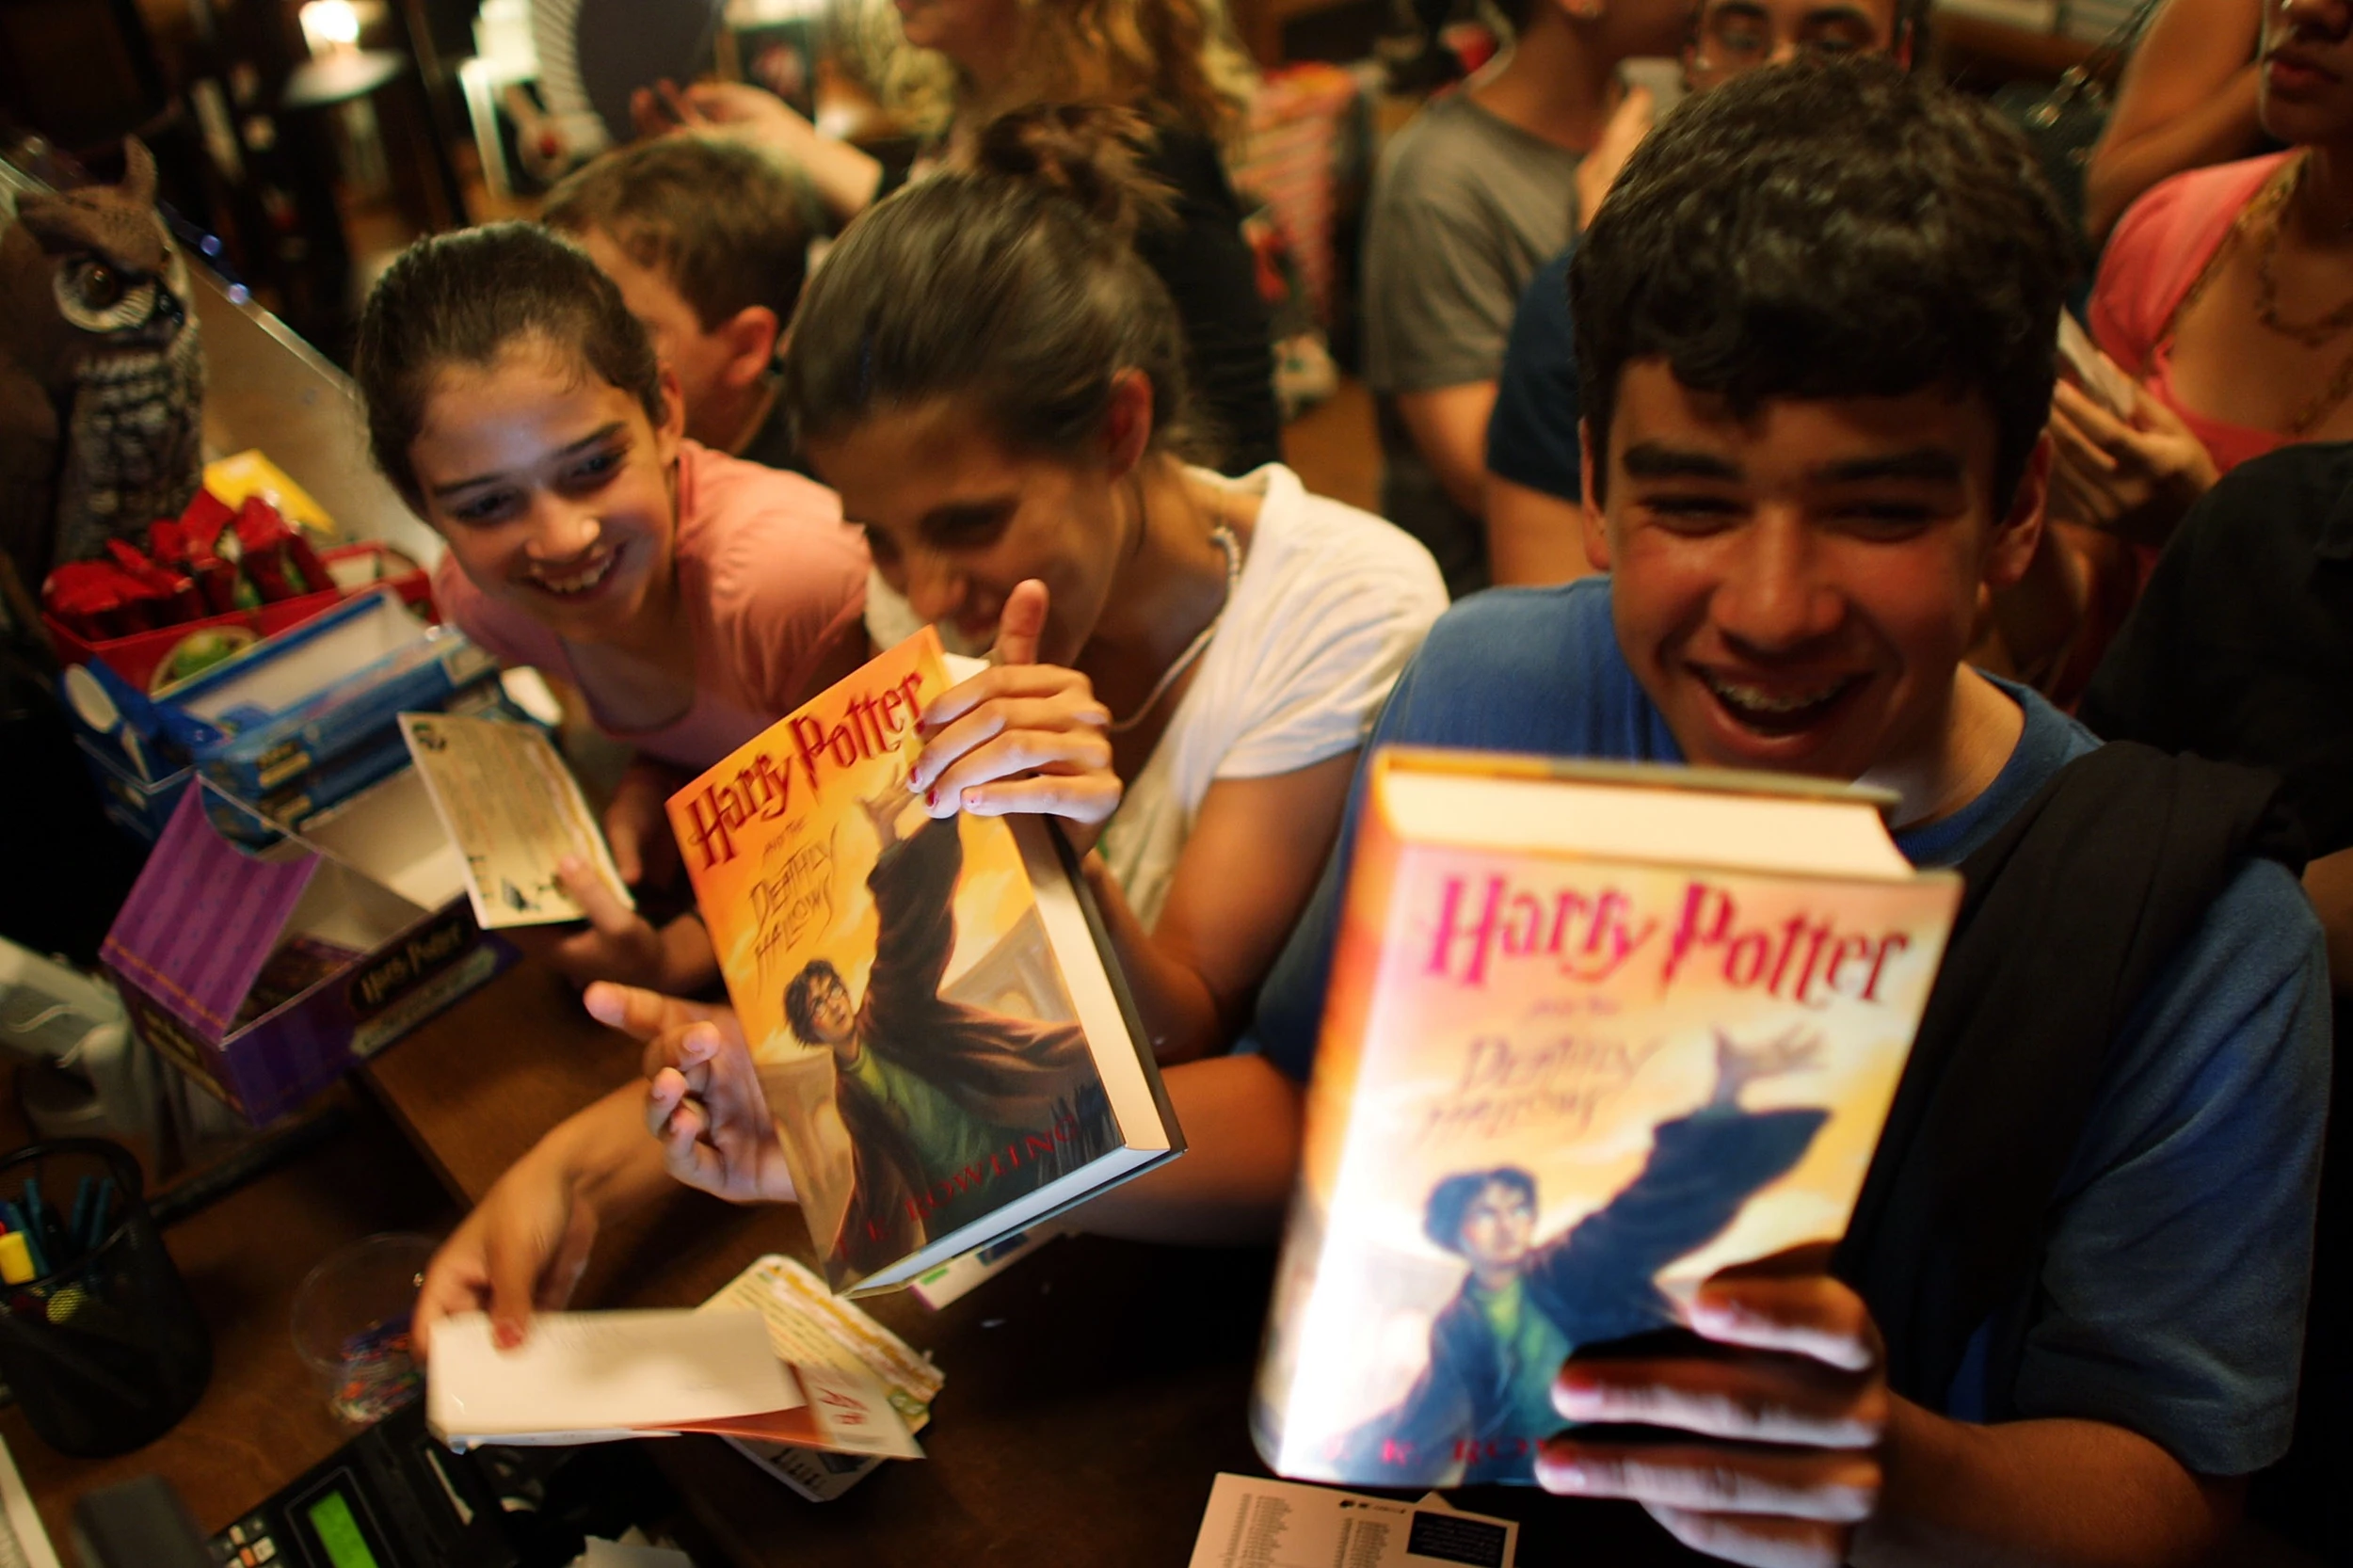 harry potter and the cursed child book release date in walmart stores